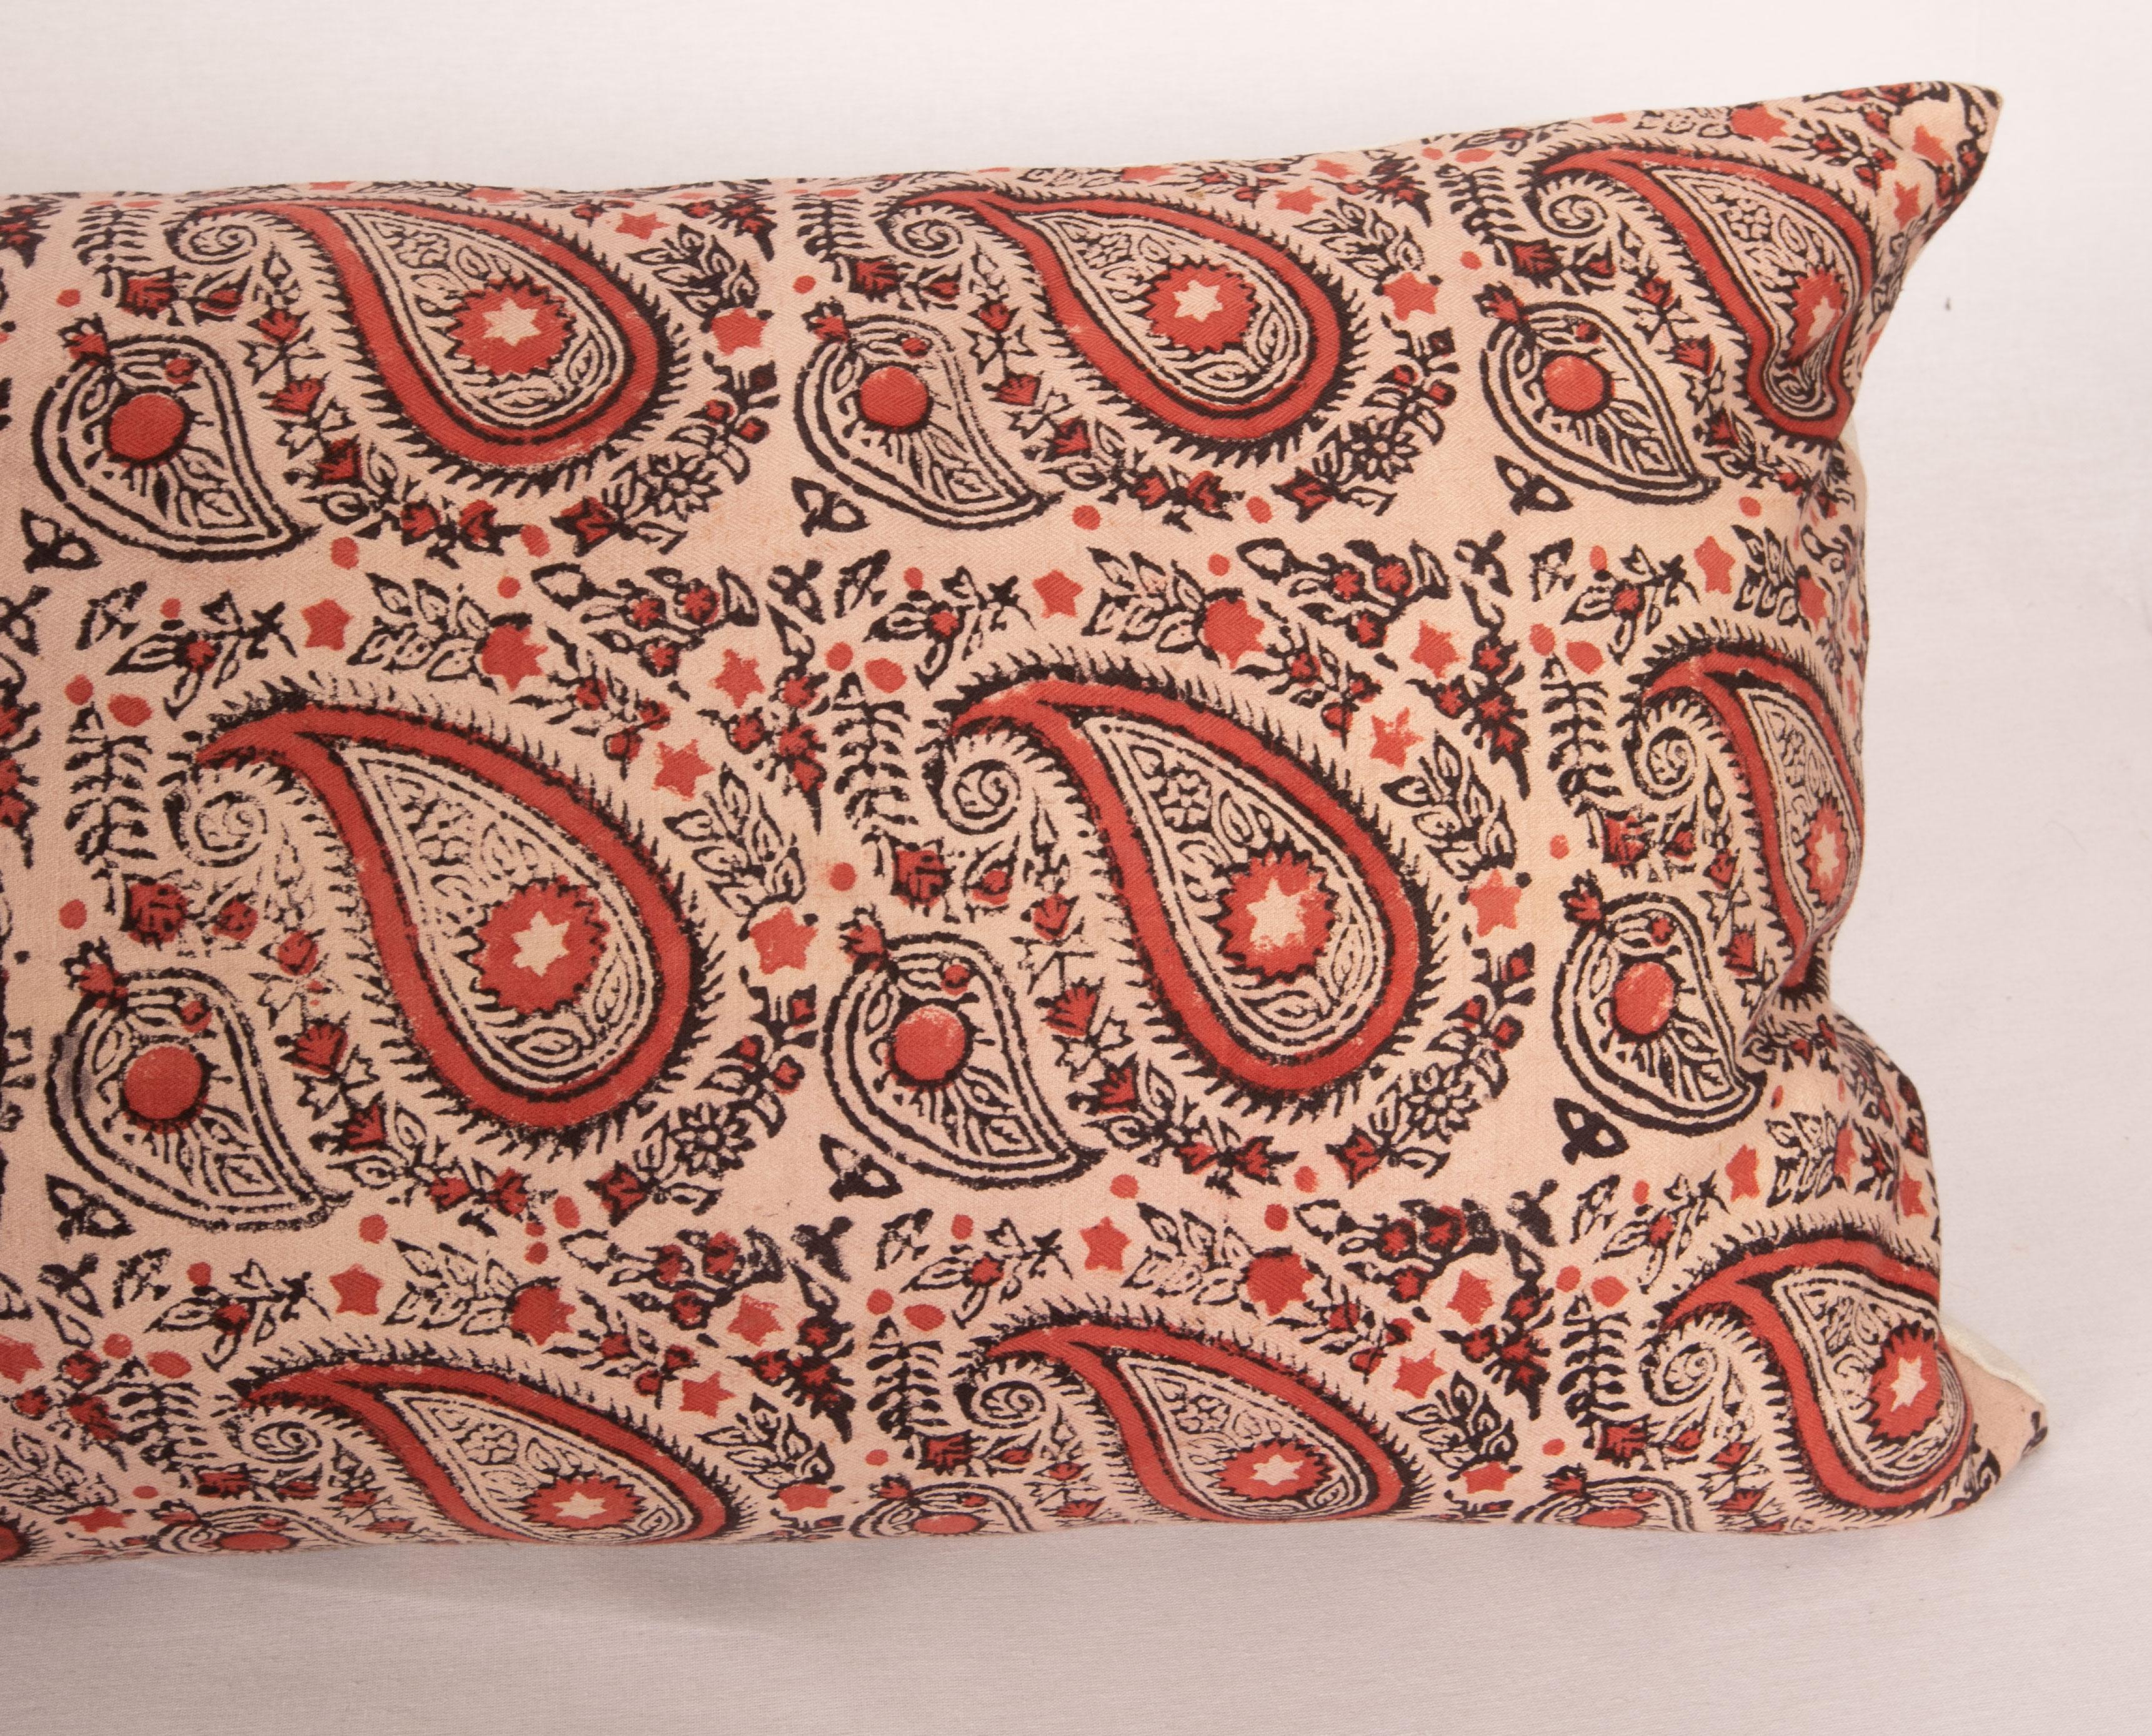 Body Pillow Case Made from an Uzbek Block Print, Early 20th C In Good Condition For Sale In Istanbul, TR